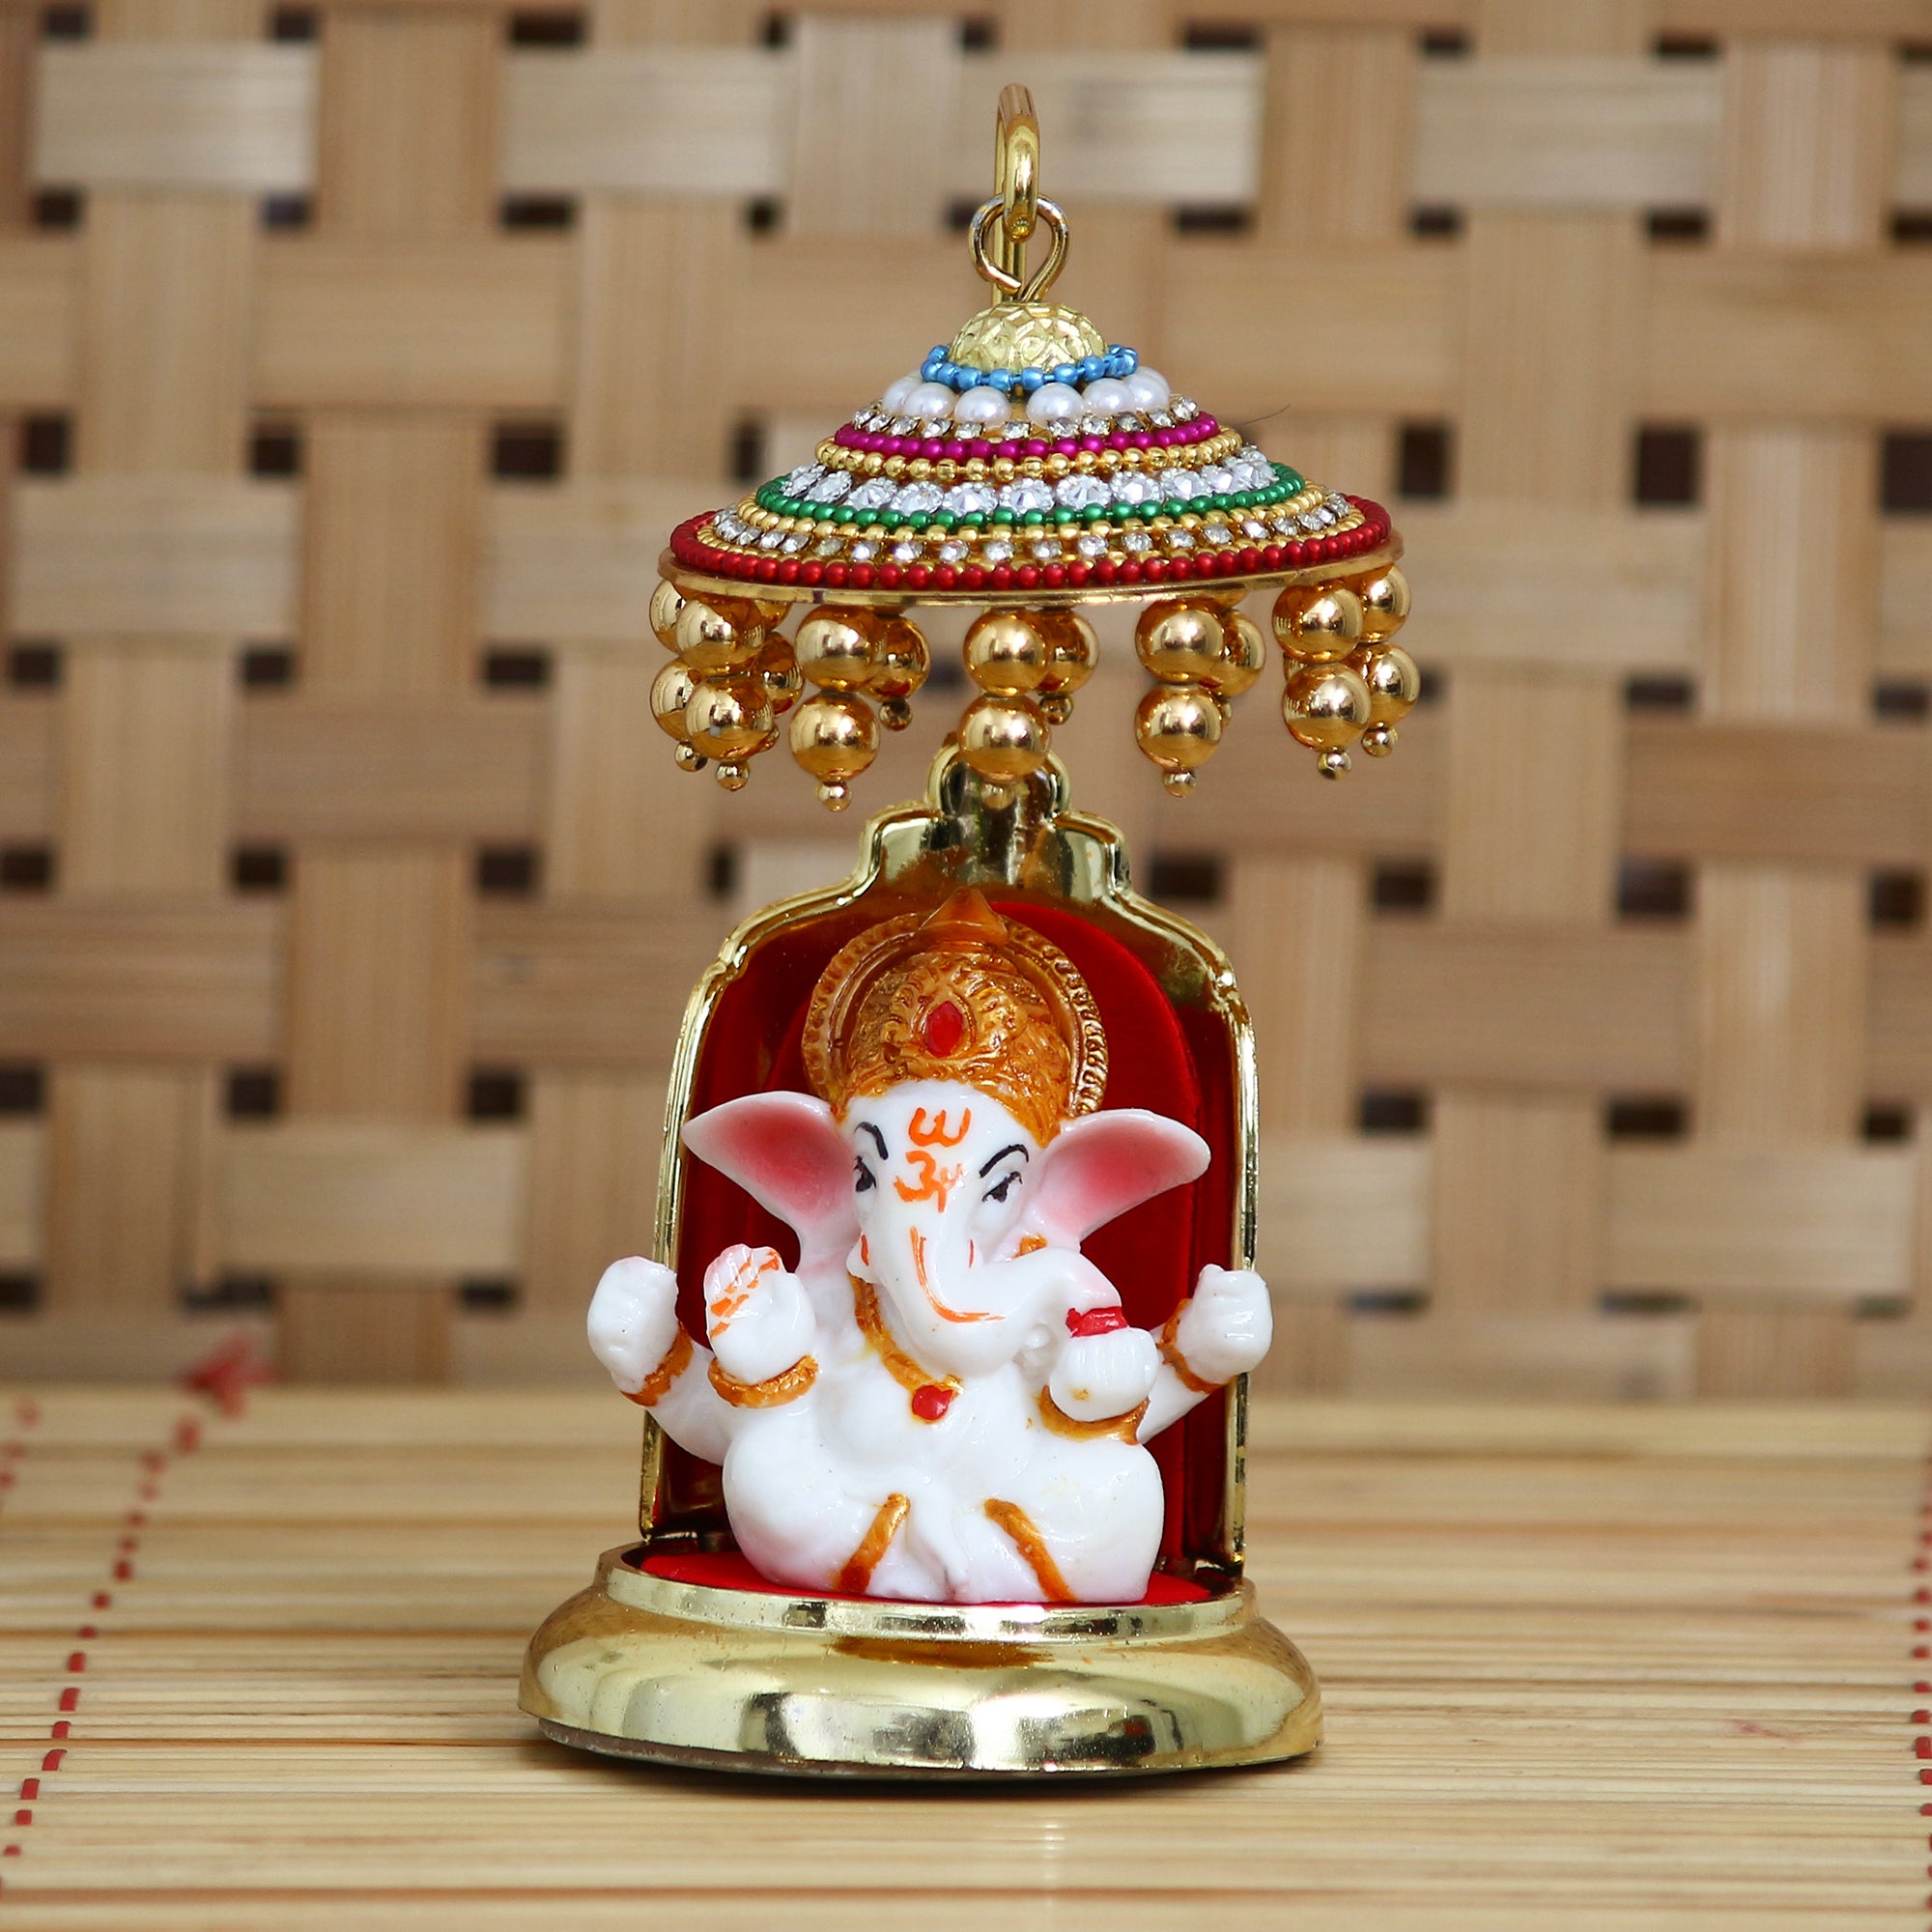 Decorative Lord Ganesha Idol with Designer Chatri for Car Dashboard, Home Temple and Office Desks